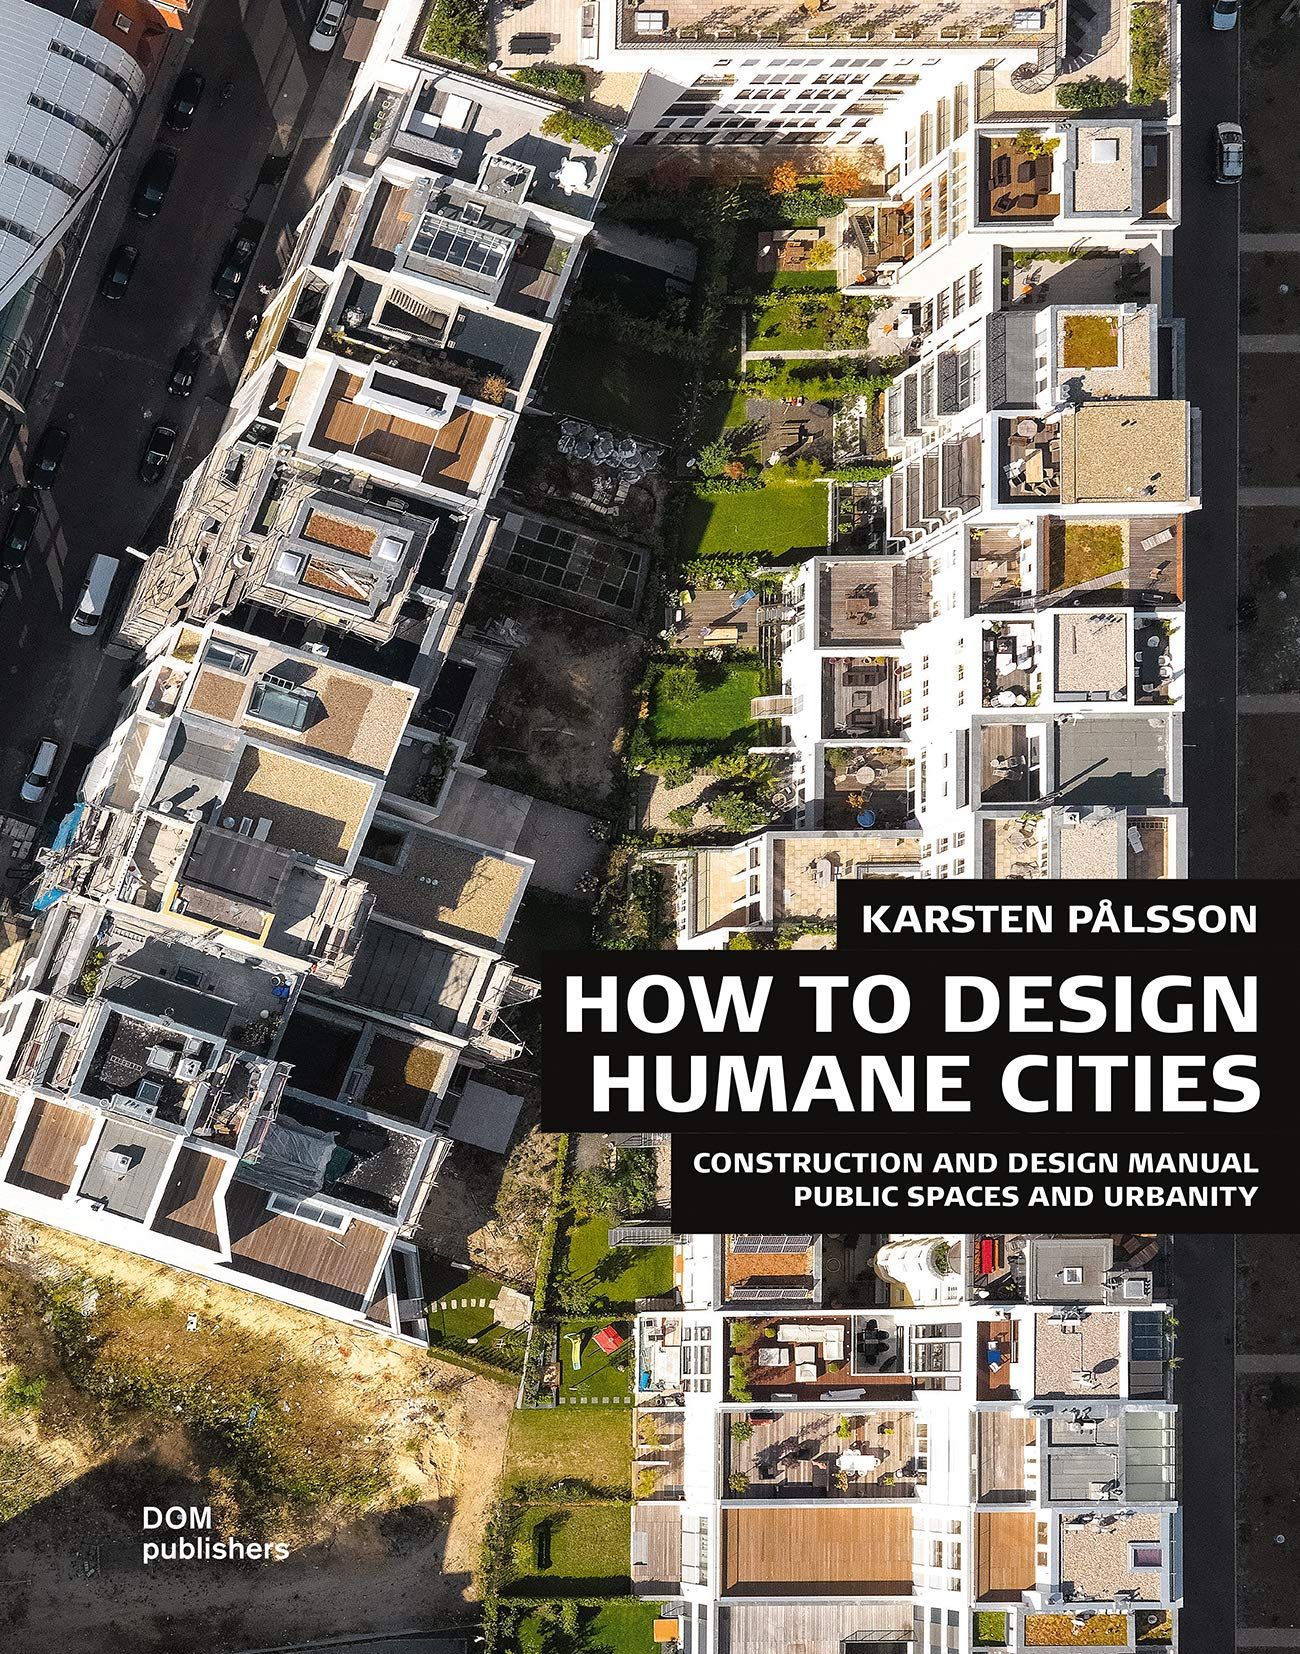  How to Design Humane Cities: Public Spaces and Urbanity_Karsten Pålsson_9783869226149_DOM Publishers 